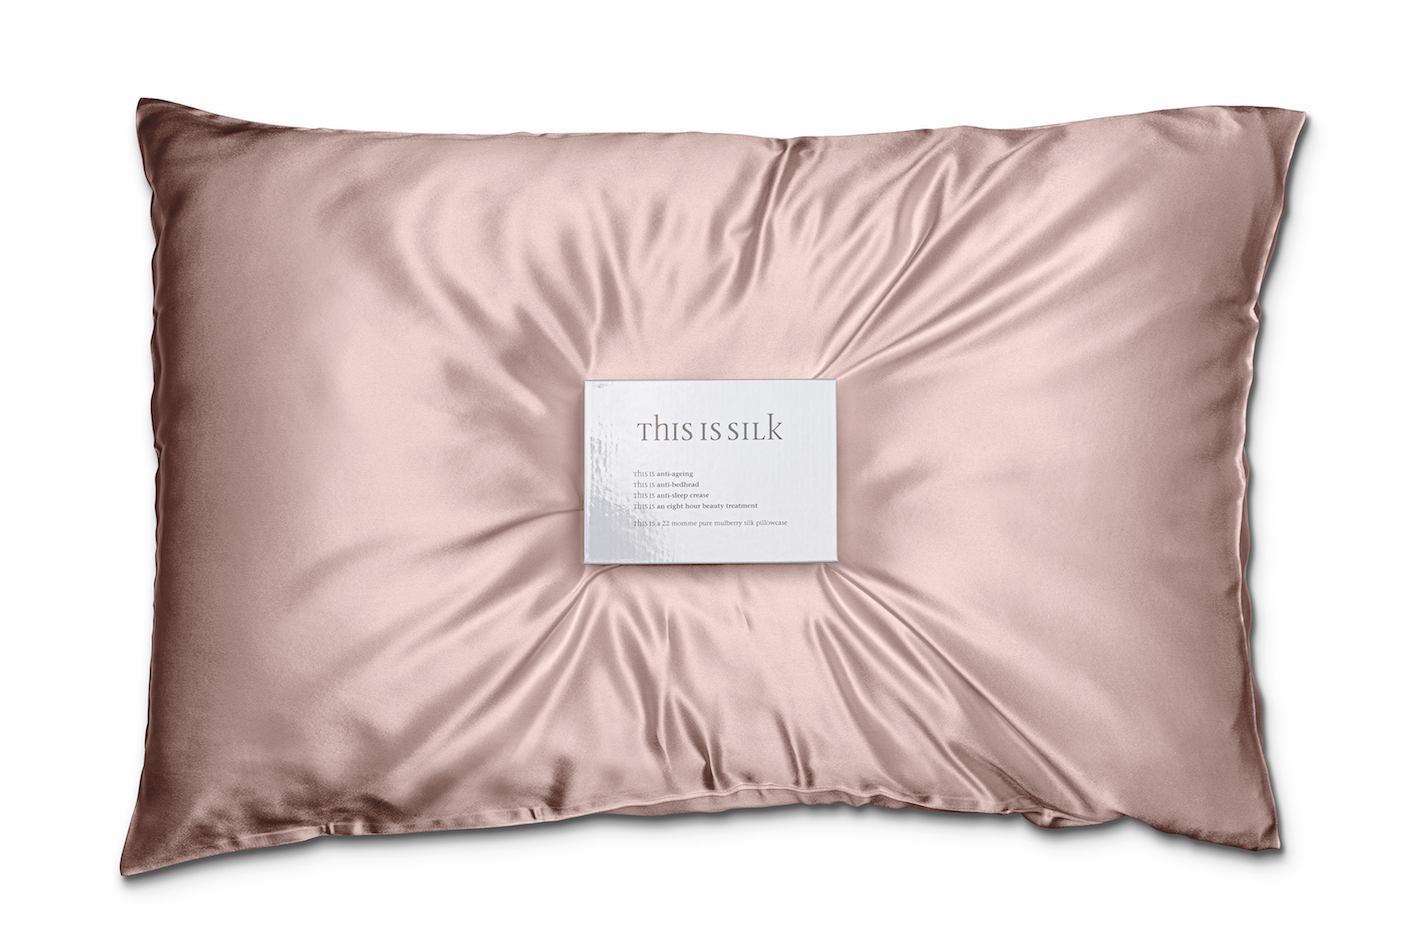 a silk pillow case makes a great Galentine's gift 